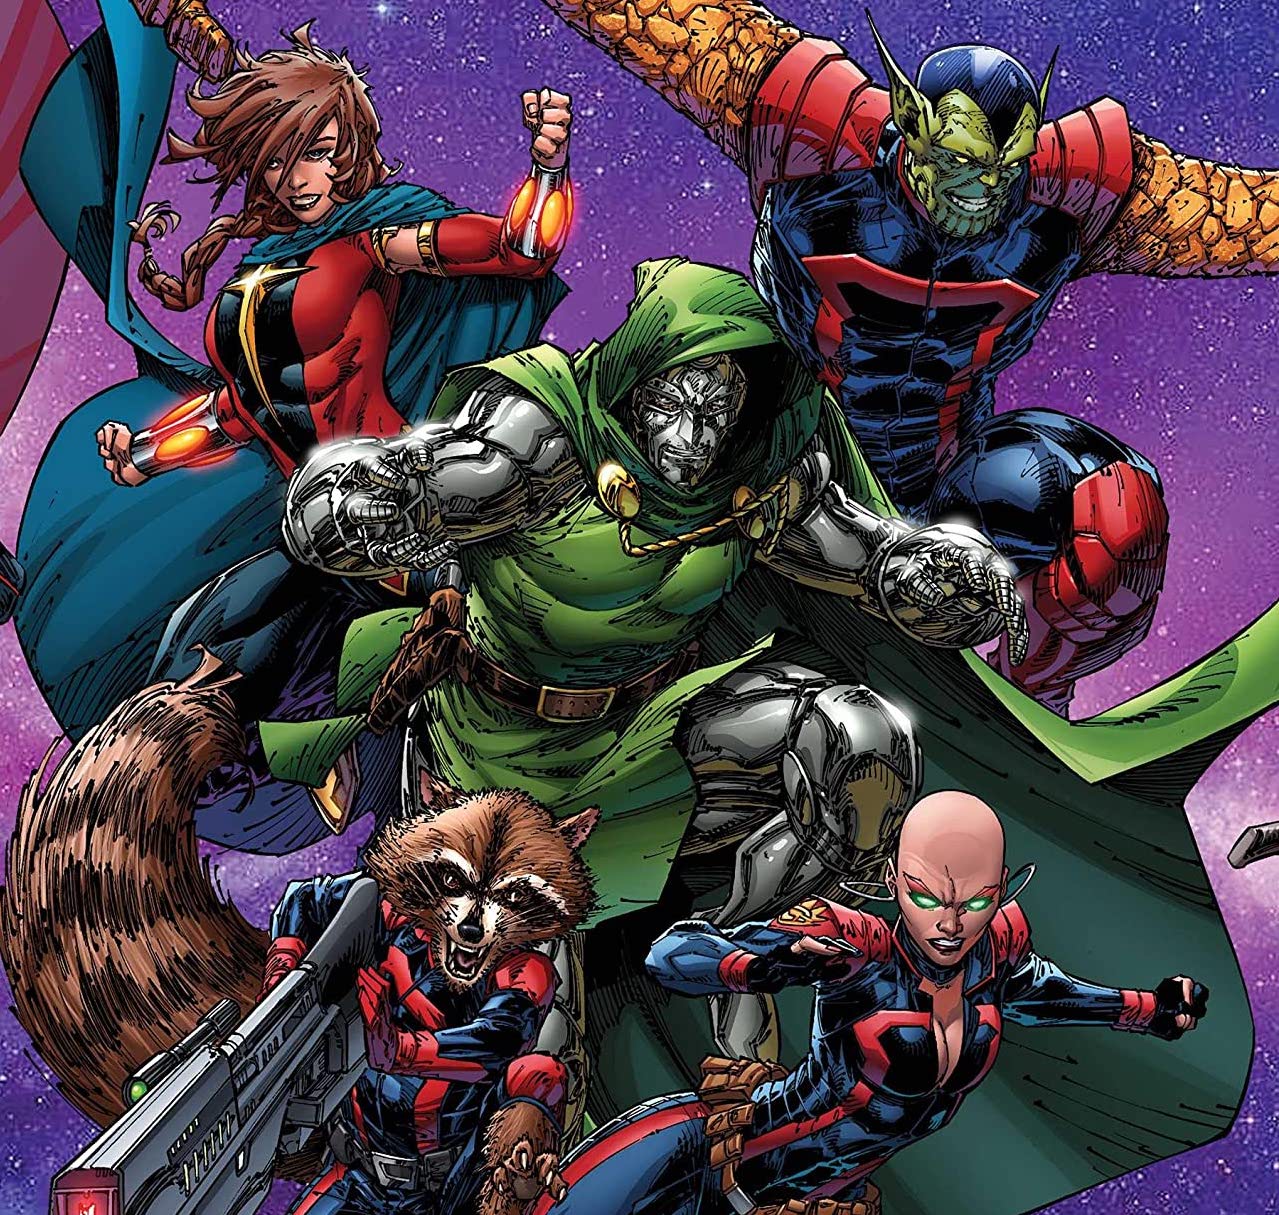 'Guardians of the Galaxy' #14 will excite longtime Marvel fans